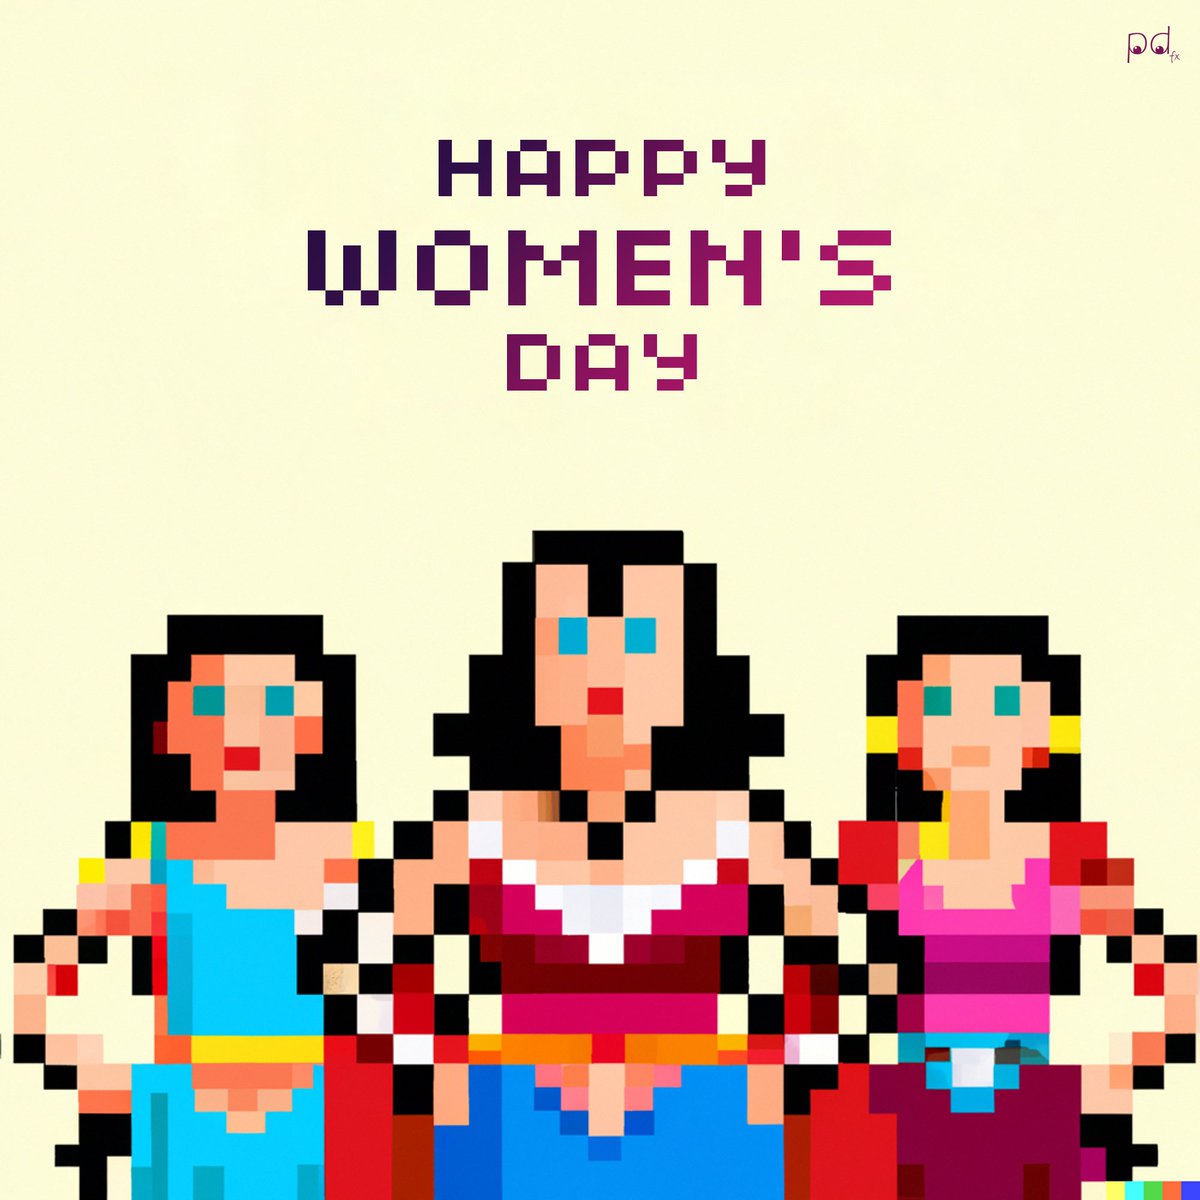 Here's to the women who inspire us to be better every day. Happy Women's Day!

#PDfx #WomensDay #posterdesign #HappyWomensDay #WomensDay2023 #Art #Photoshop #creativityatitsbest #graphicdesigner #creativeminds #designthinking #holifestivalofcolours